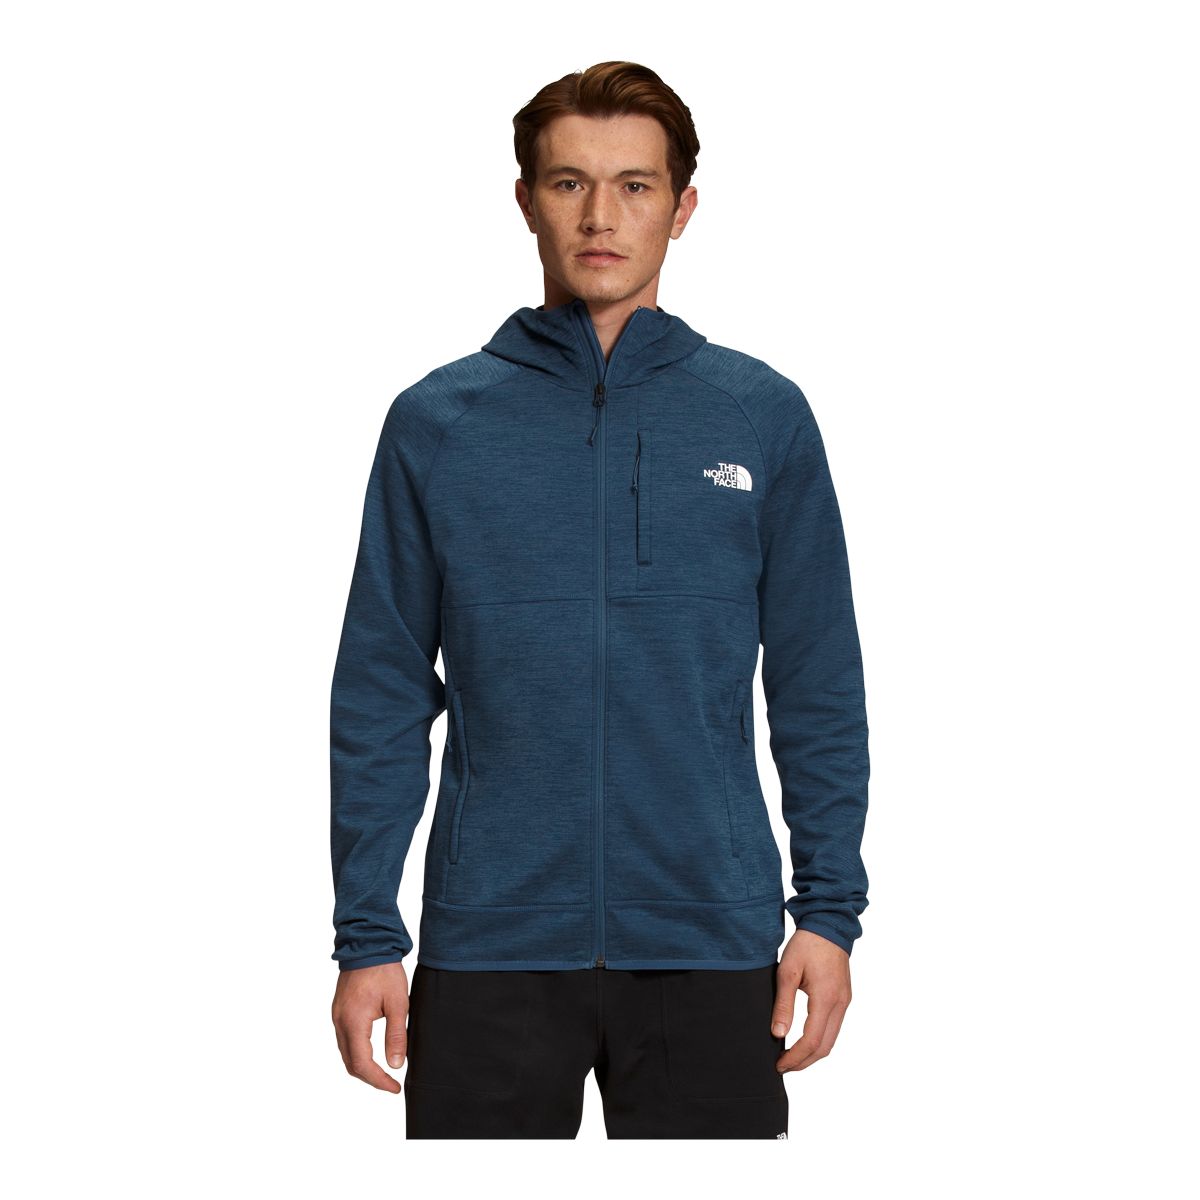 https://media-www.sportchek.ca/product/div-03-softgoods/dpt-72-casual-clothing/sdpt-01-mens/334063104/the-north-face-men-s-canyonlands-hoodie-8afca183-65f3-413c-a7ff-c7e7dabf7969-jpgrendition.jpg